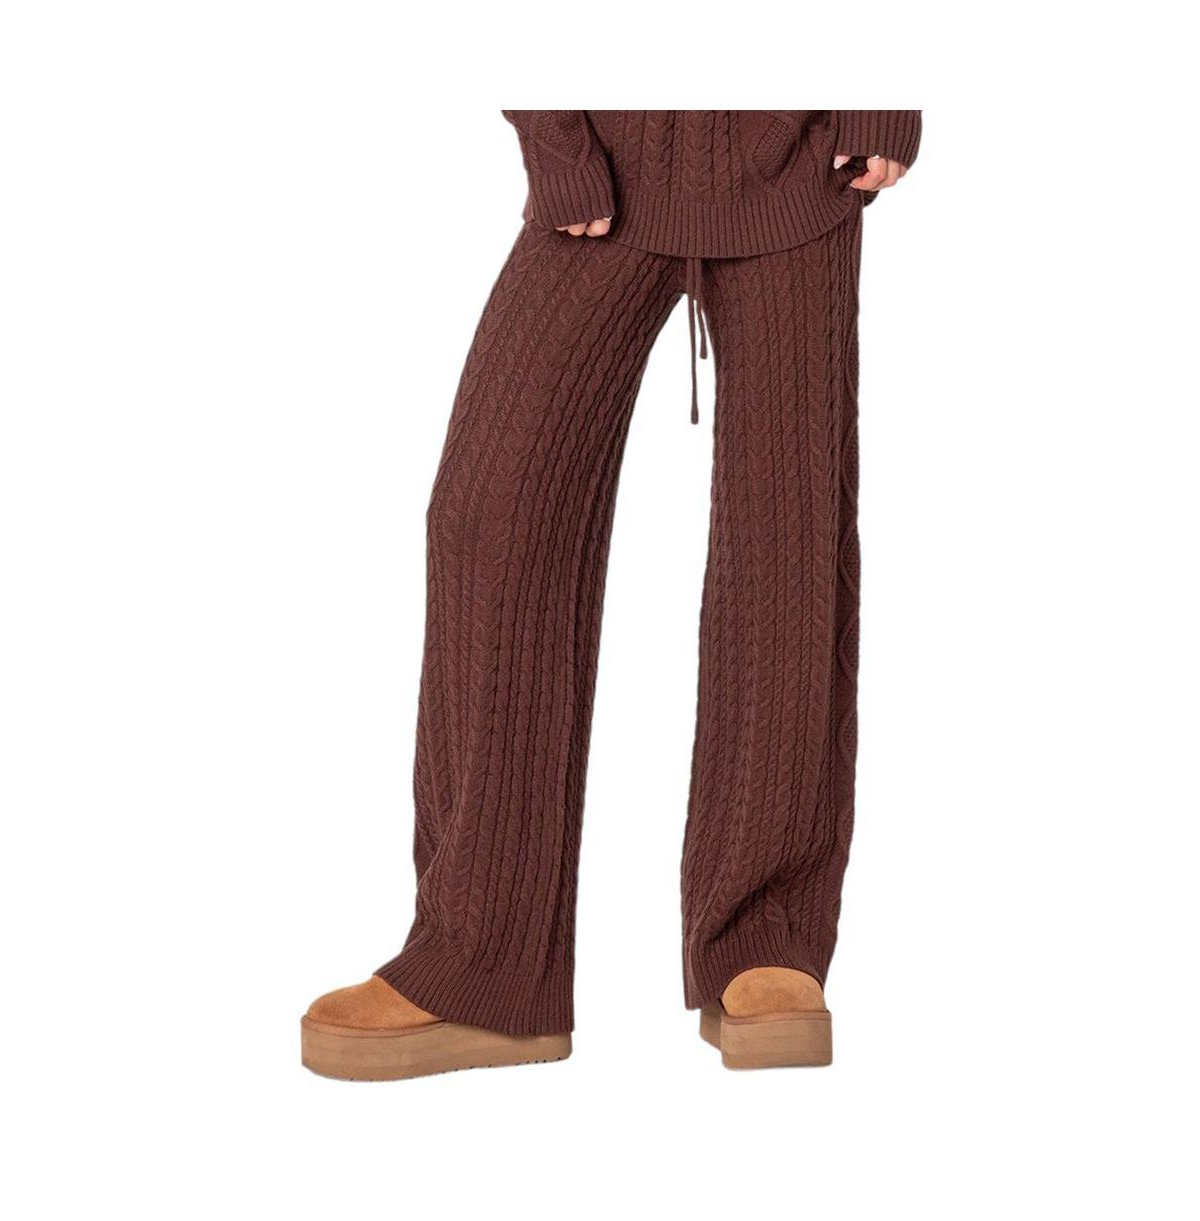 EDIKTED WOMEN'S JELENA RELAXED CABLE KNIT PANTS